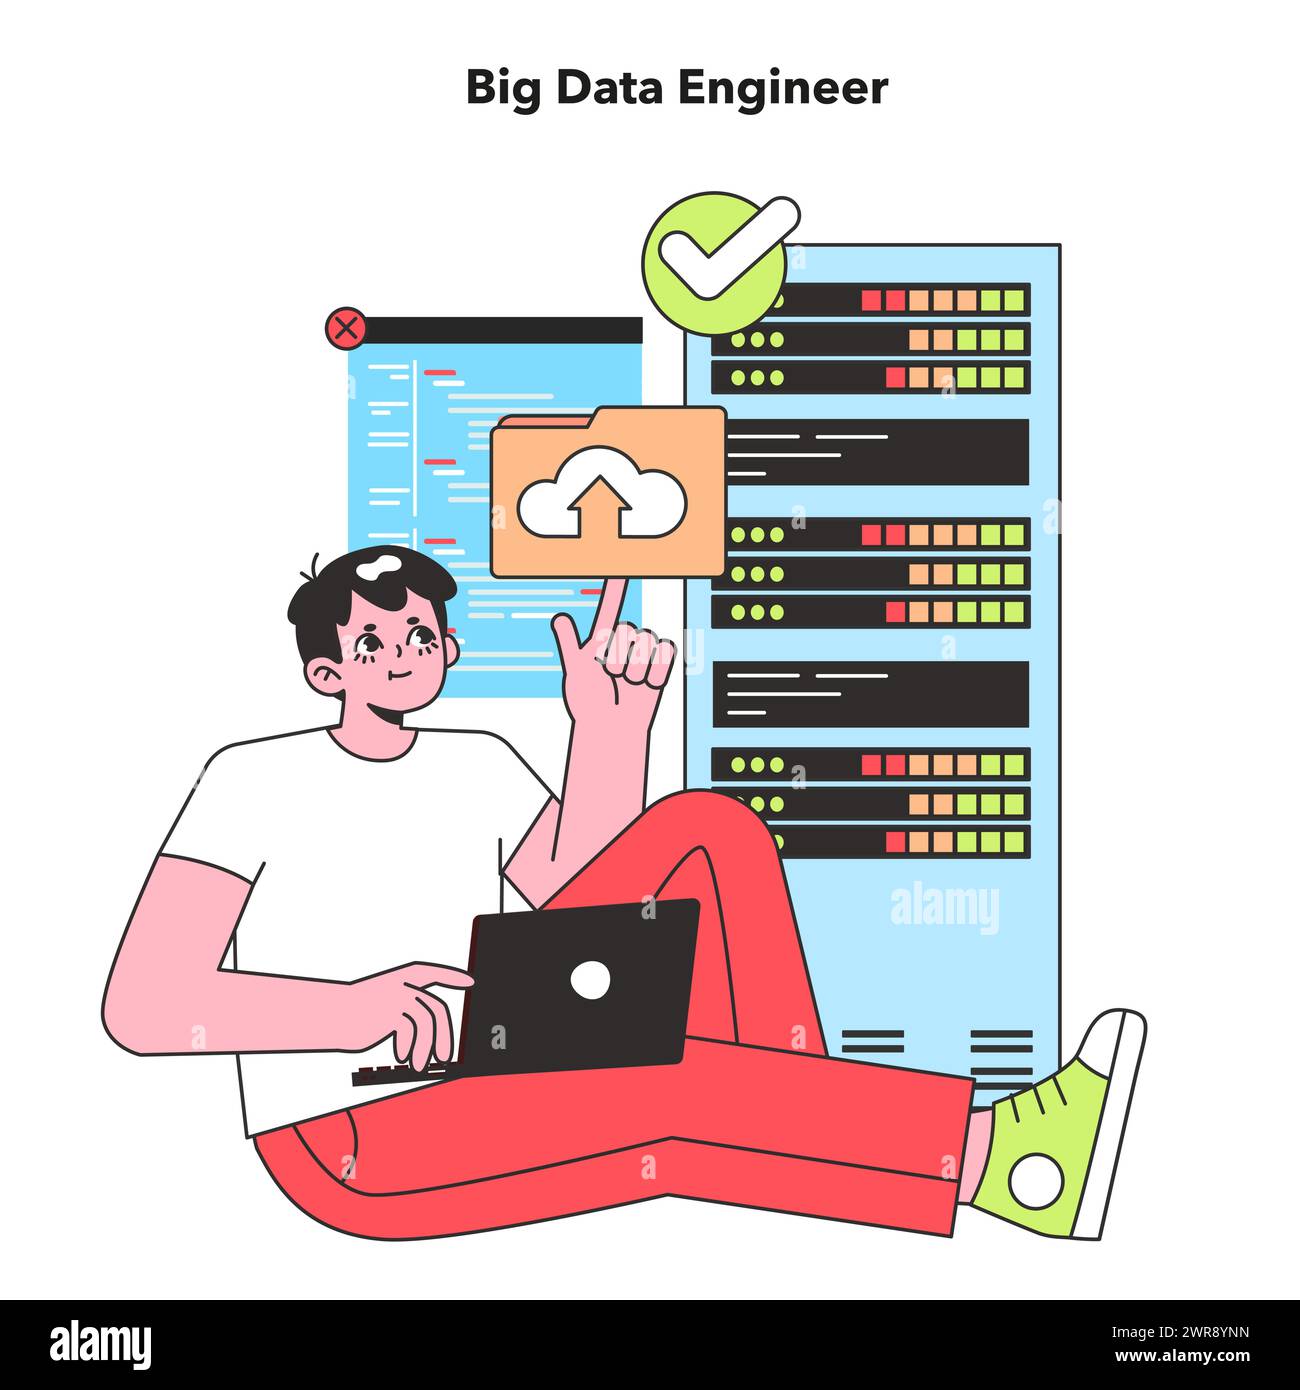 A Big Data Engineer is depicted in a relaxed pose, confidently managing vast datasets, symbolizing the crucial role of data analysis in the tech industry. Stock Vector